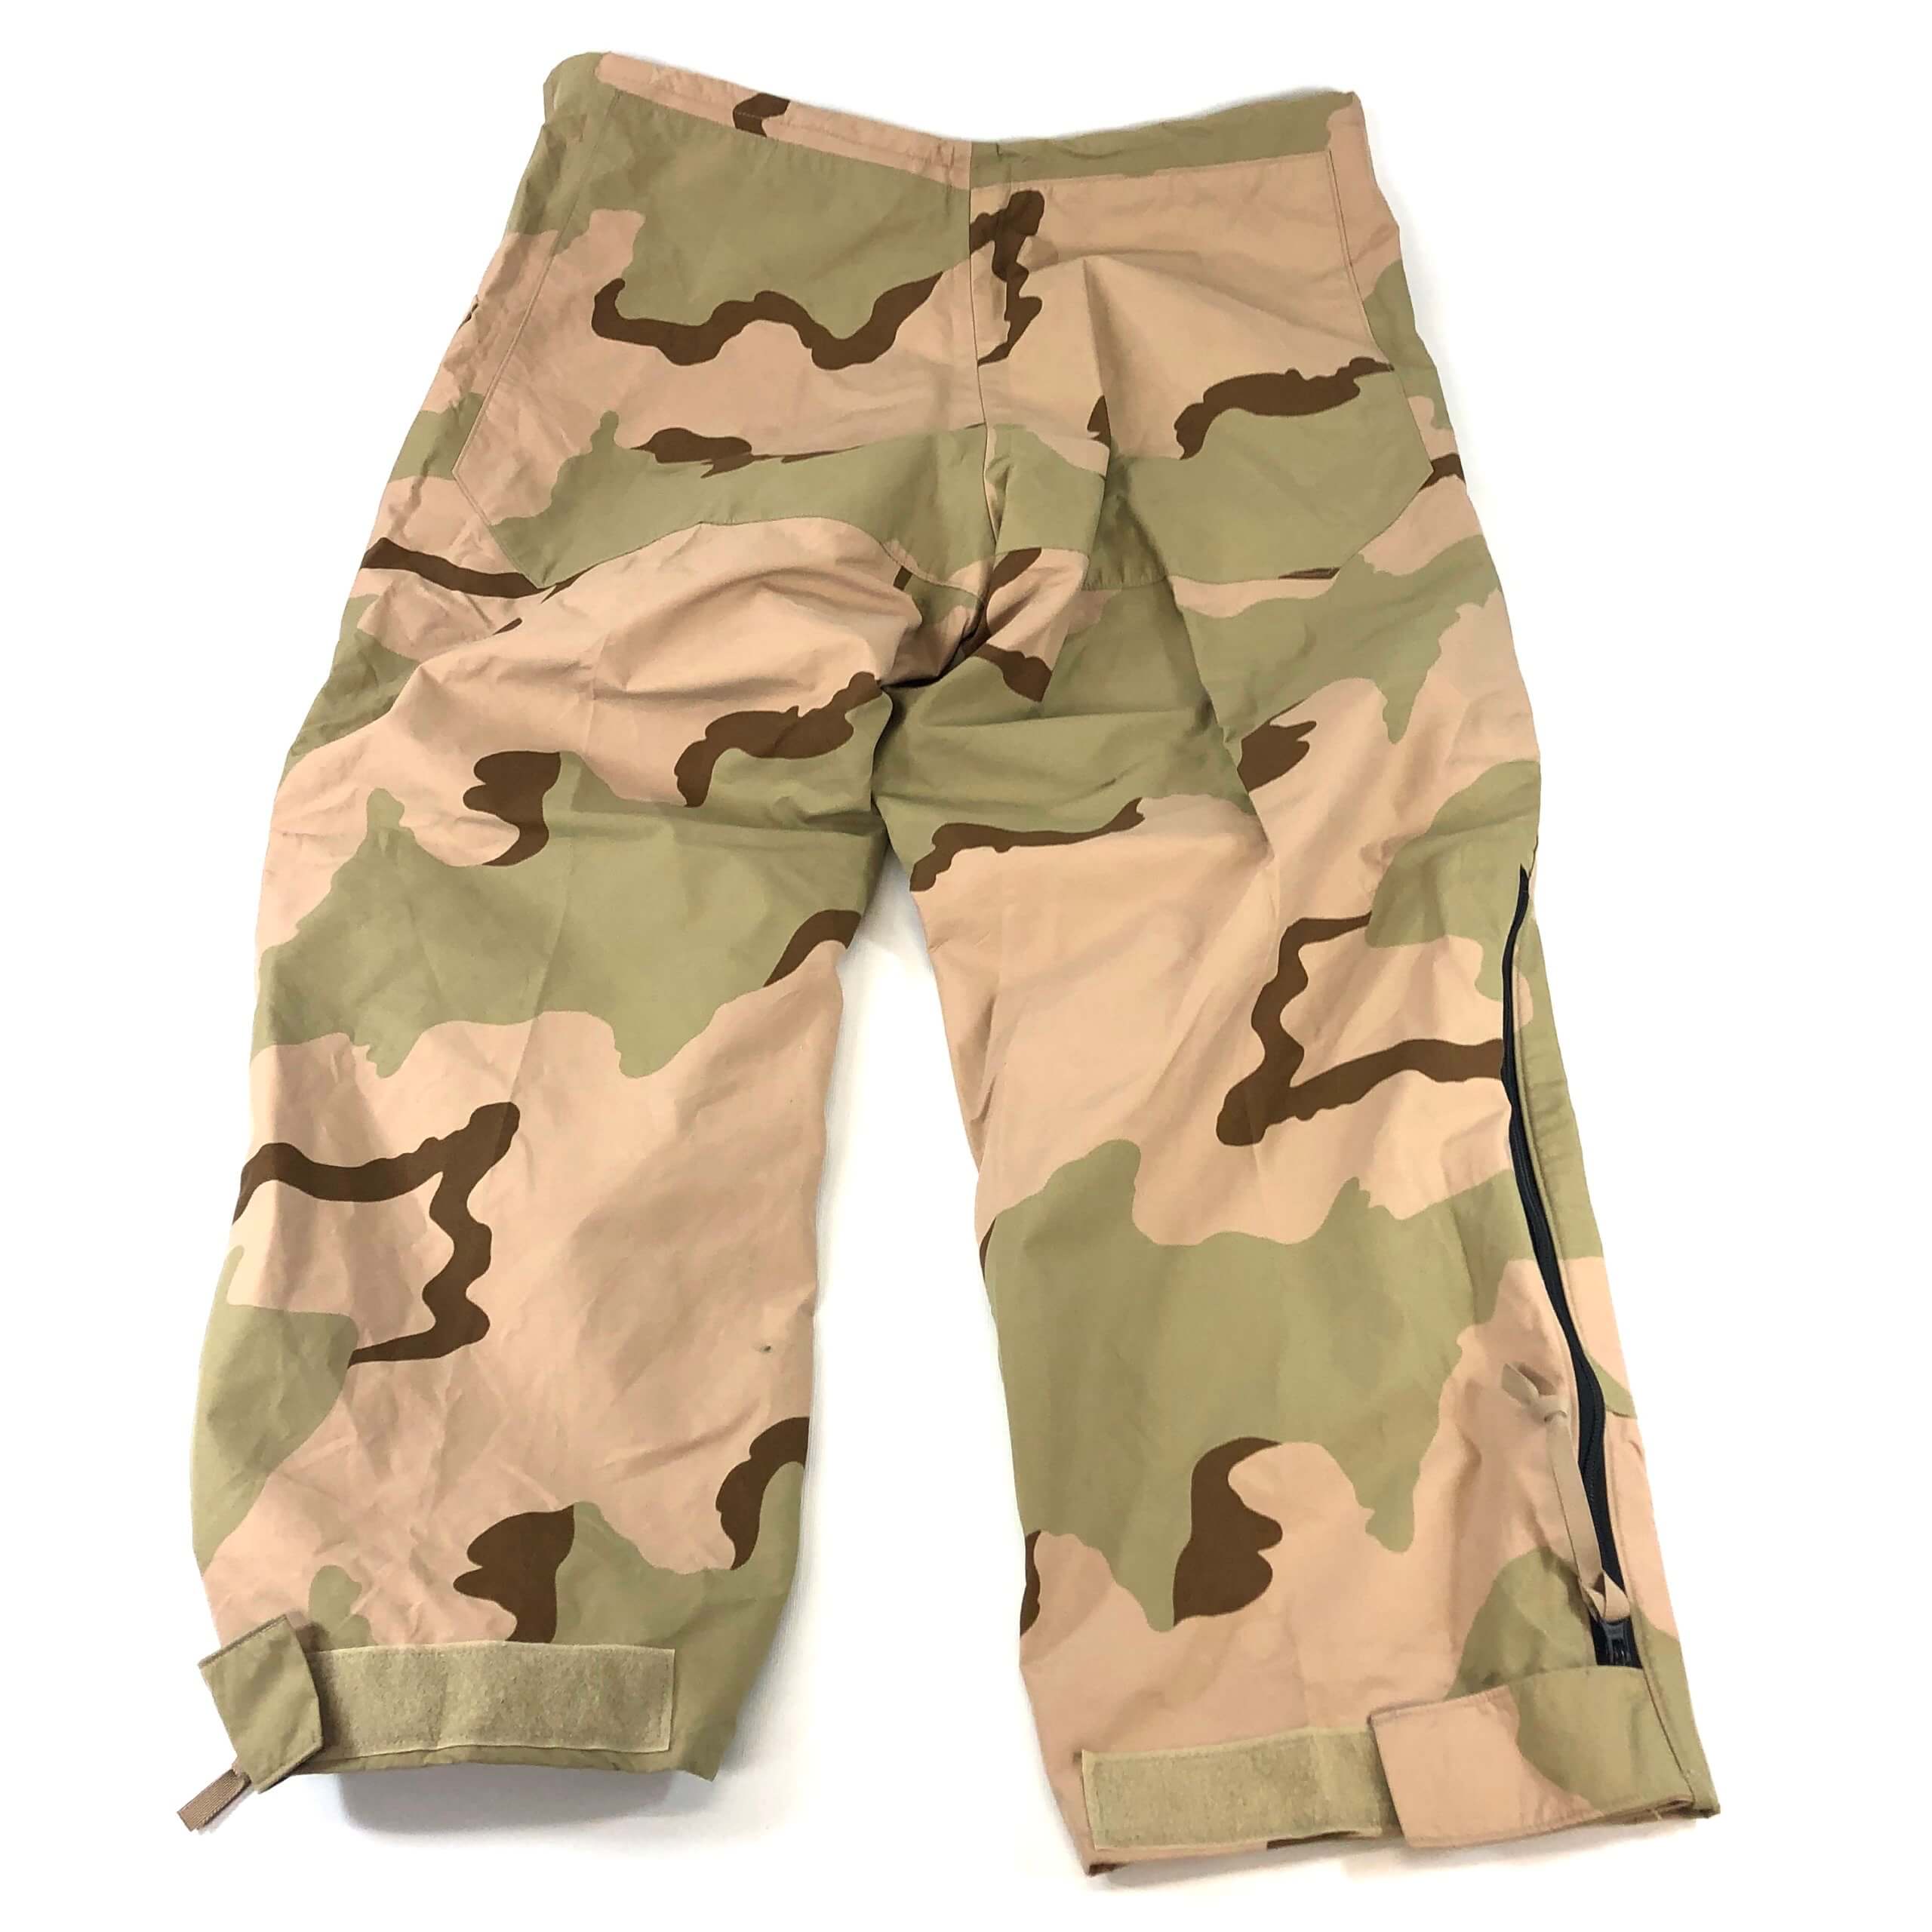 USGI MILITARY ISSUE 3 COLOR DESERT CAMO BDU DCU TROUSERS PANTS TWILL NEW 